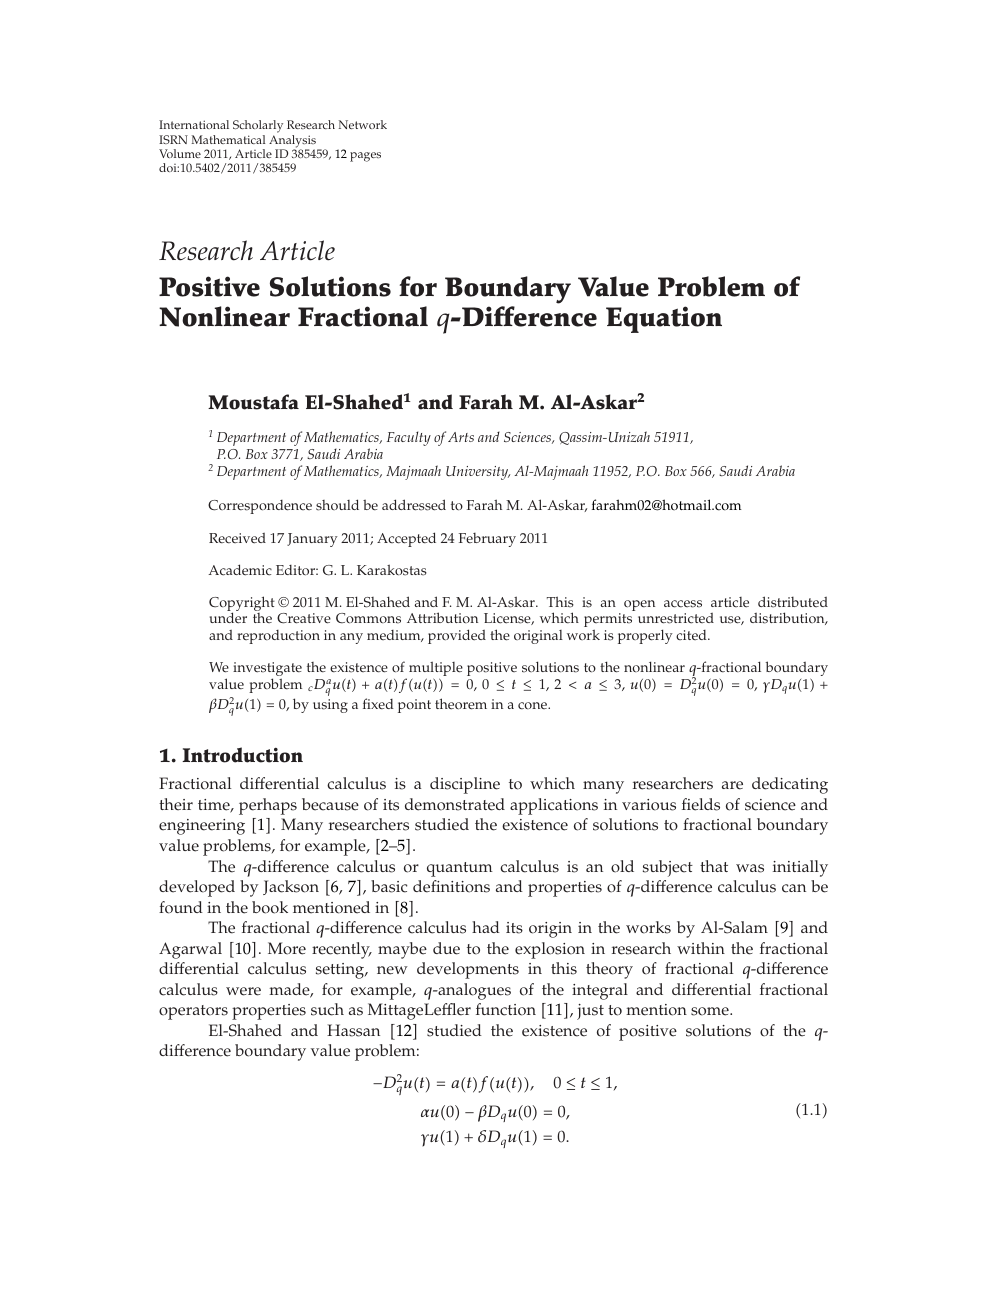 Positive Solutions For Boundary Value Problem Of Nonlinear Fractional 𝑞 Difference Equation Topic Of Research Paper In Mathematics Download Scholarly Article Pdf And Read For Free On Cyberleninka Open Science Hub